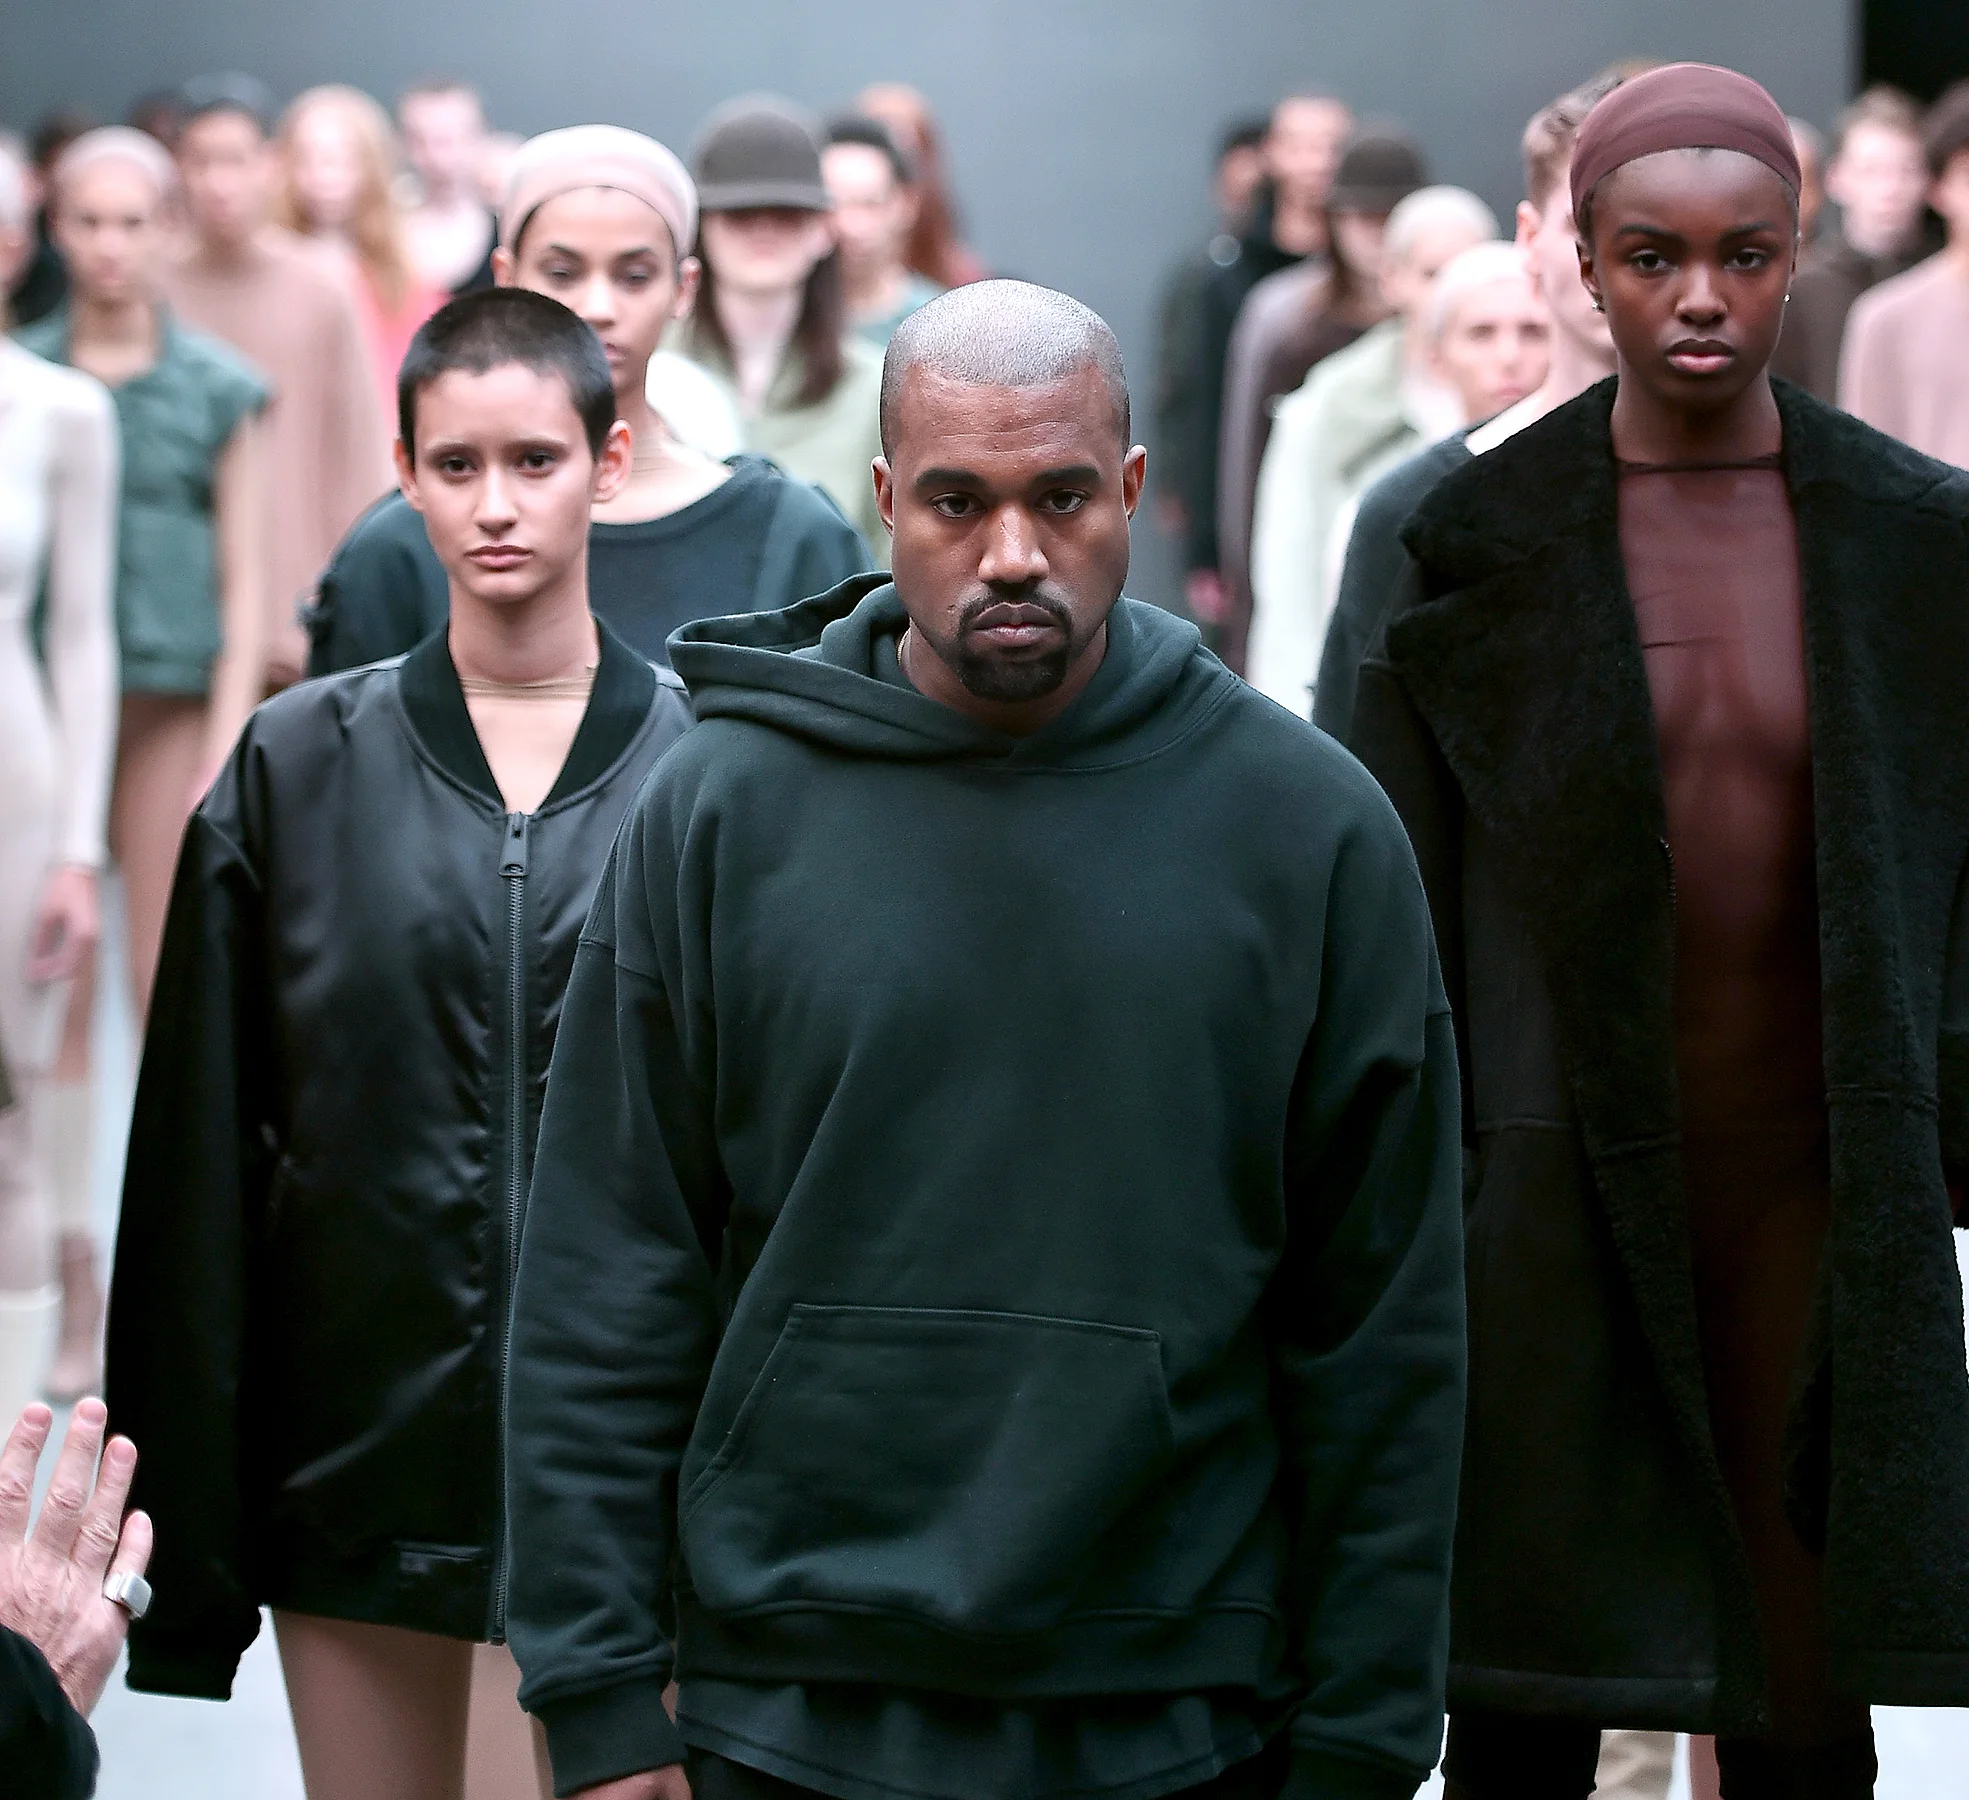 Kanye’s ‘Yeezy’ clothing line owes the state of California $600K in unpaid taxes